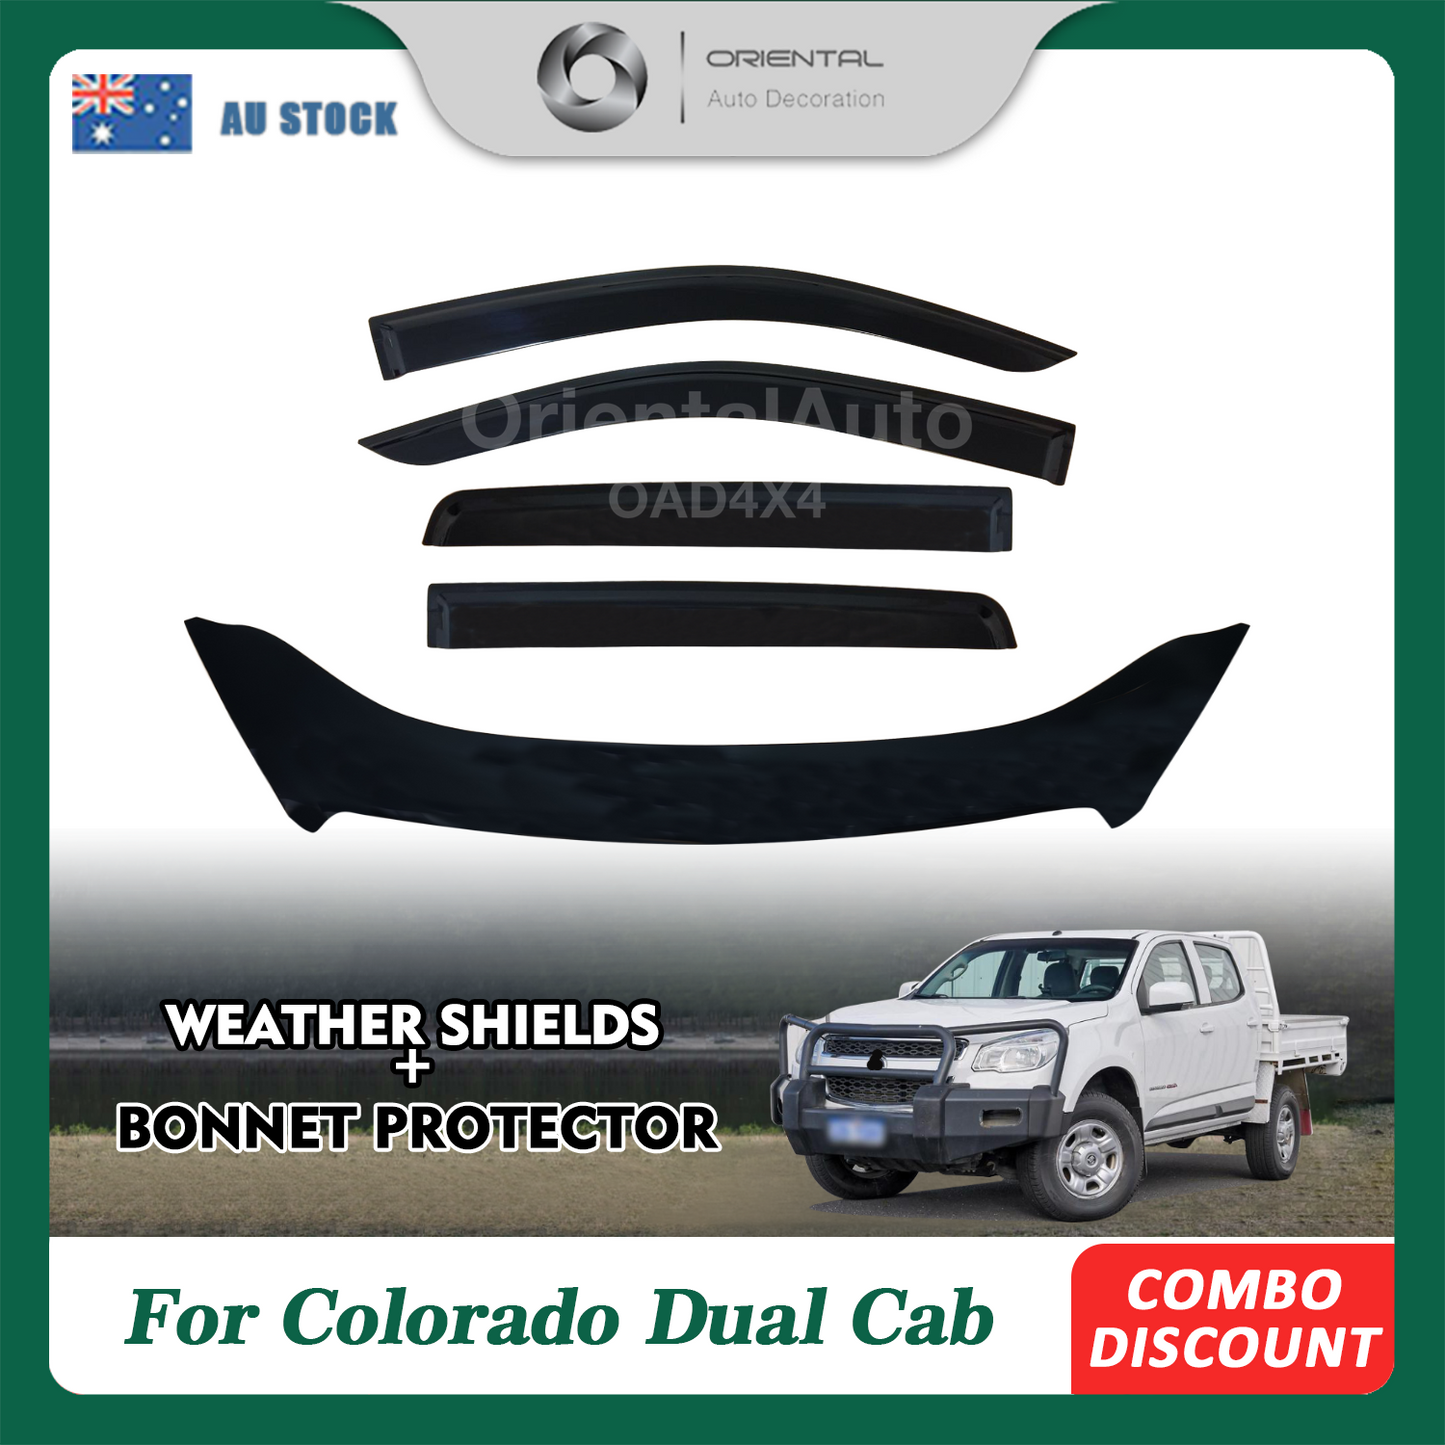 Bonnet Protector & Injection Weathershields Weather shields Window Visor for Holden Colorado RG Series Dual Cab 2012-2016